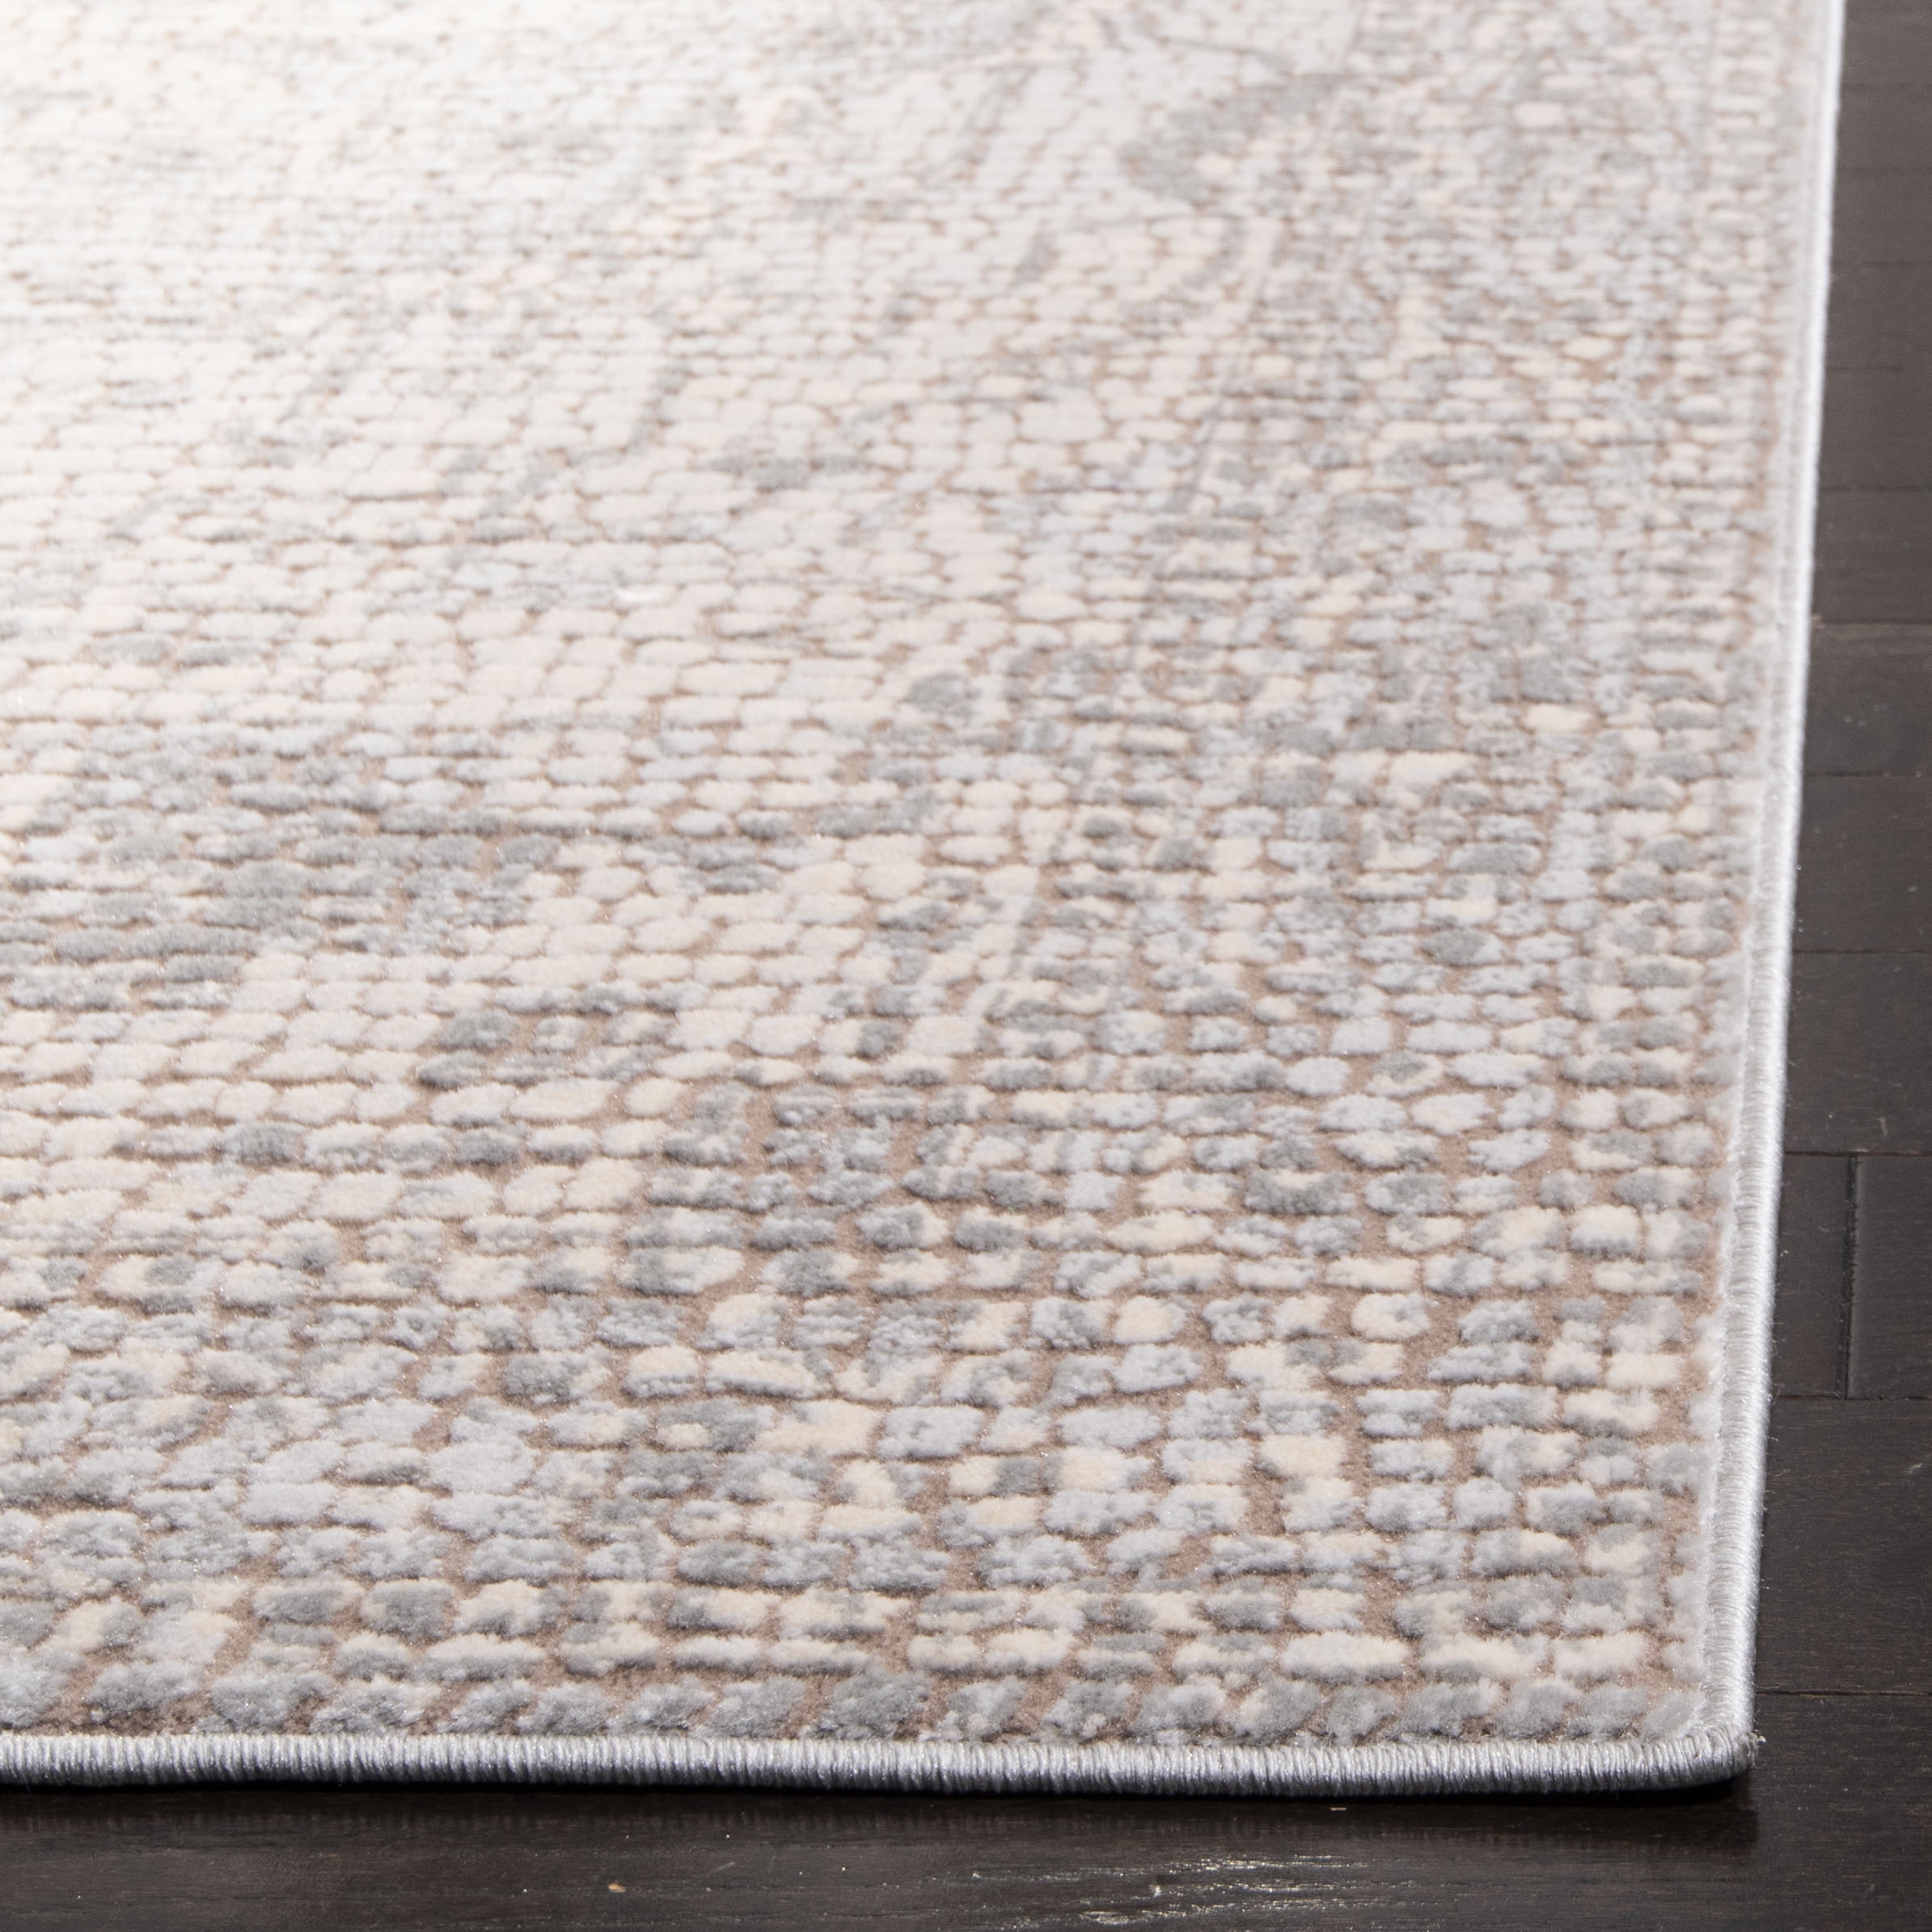 Arlo Home Woven Area Rug, MAR412G, Silver/Ivory,  4' X 6' - Image 2